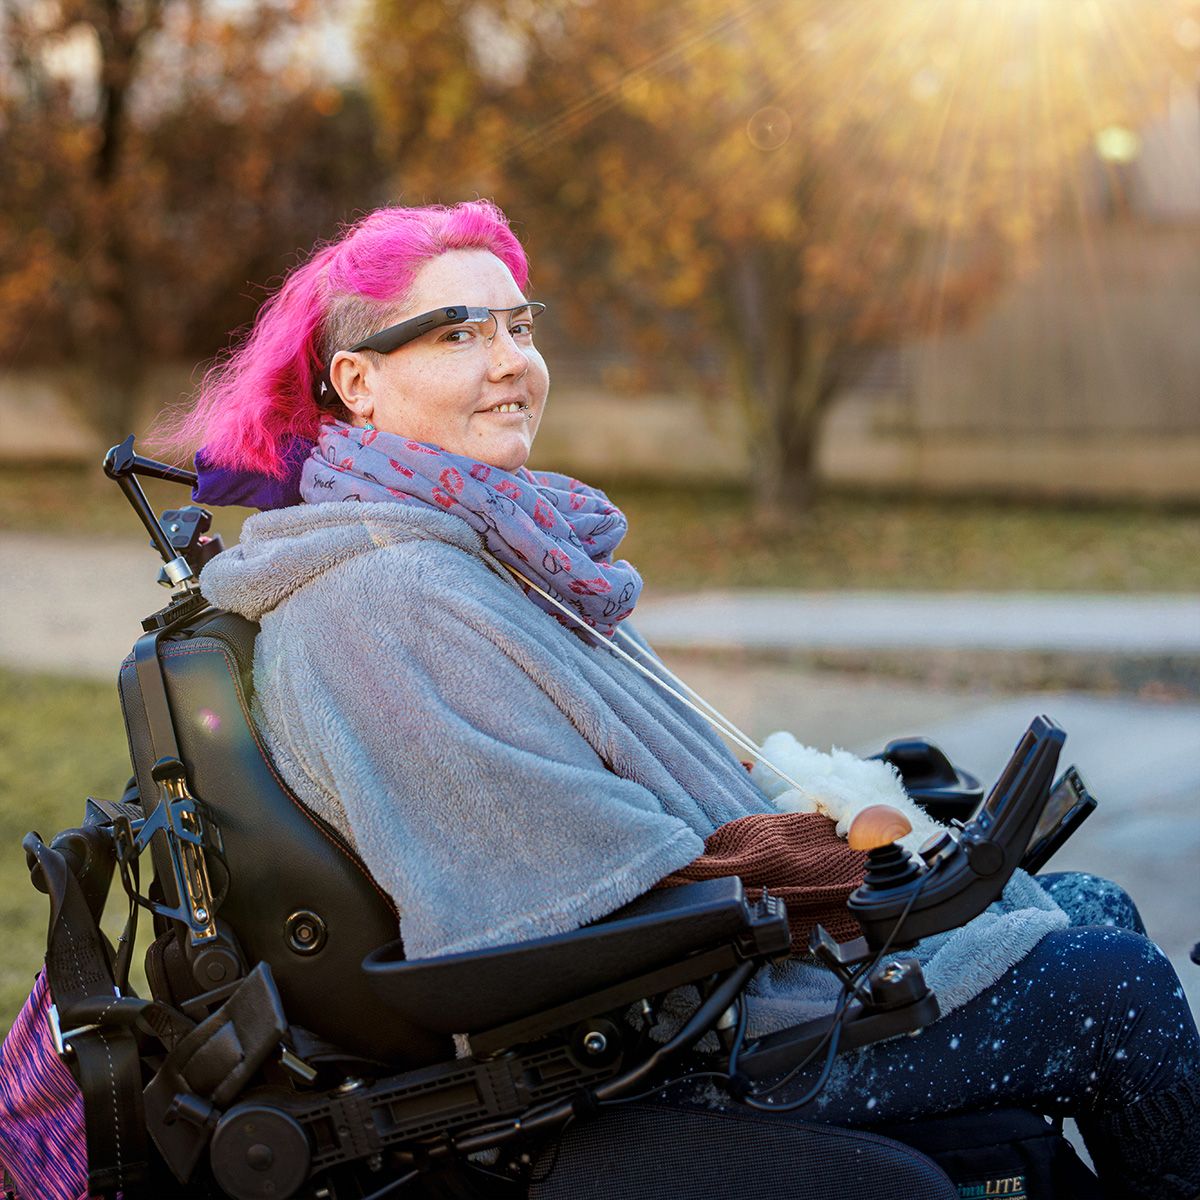 Munevo user with pink hair smiling while sitting on their wheelchair